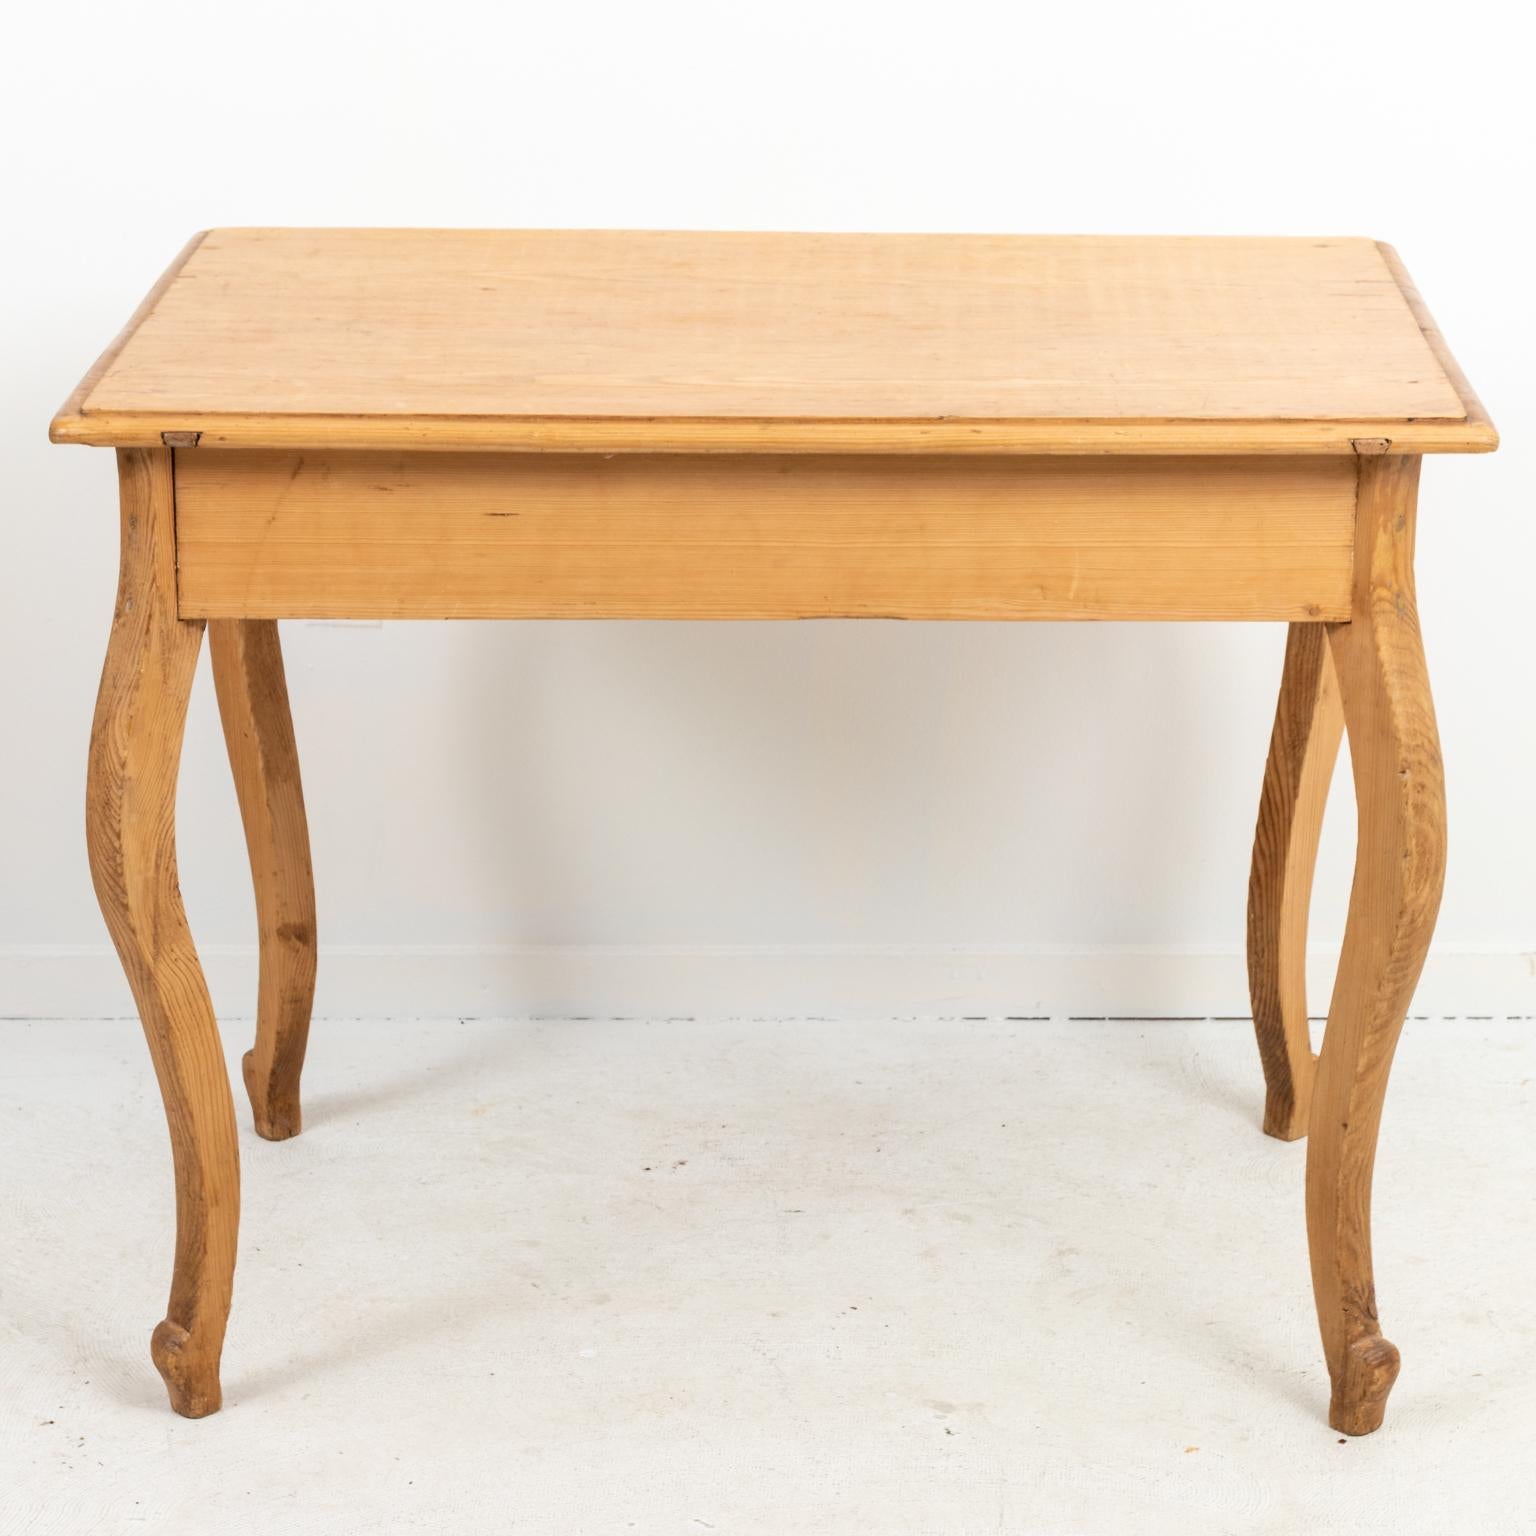 French pinewood table with one drawer and cabriole style legs, circa 1880s. Made in France. Please note of wear consistent with age including minor fading, finish loss, wood loss, and chips. There is also a large crack on the tabletop.